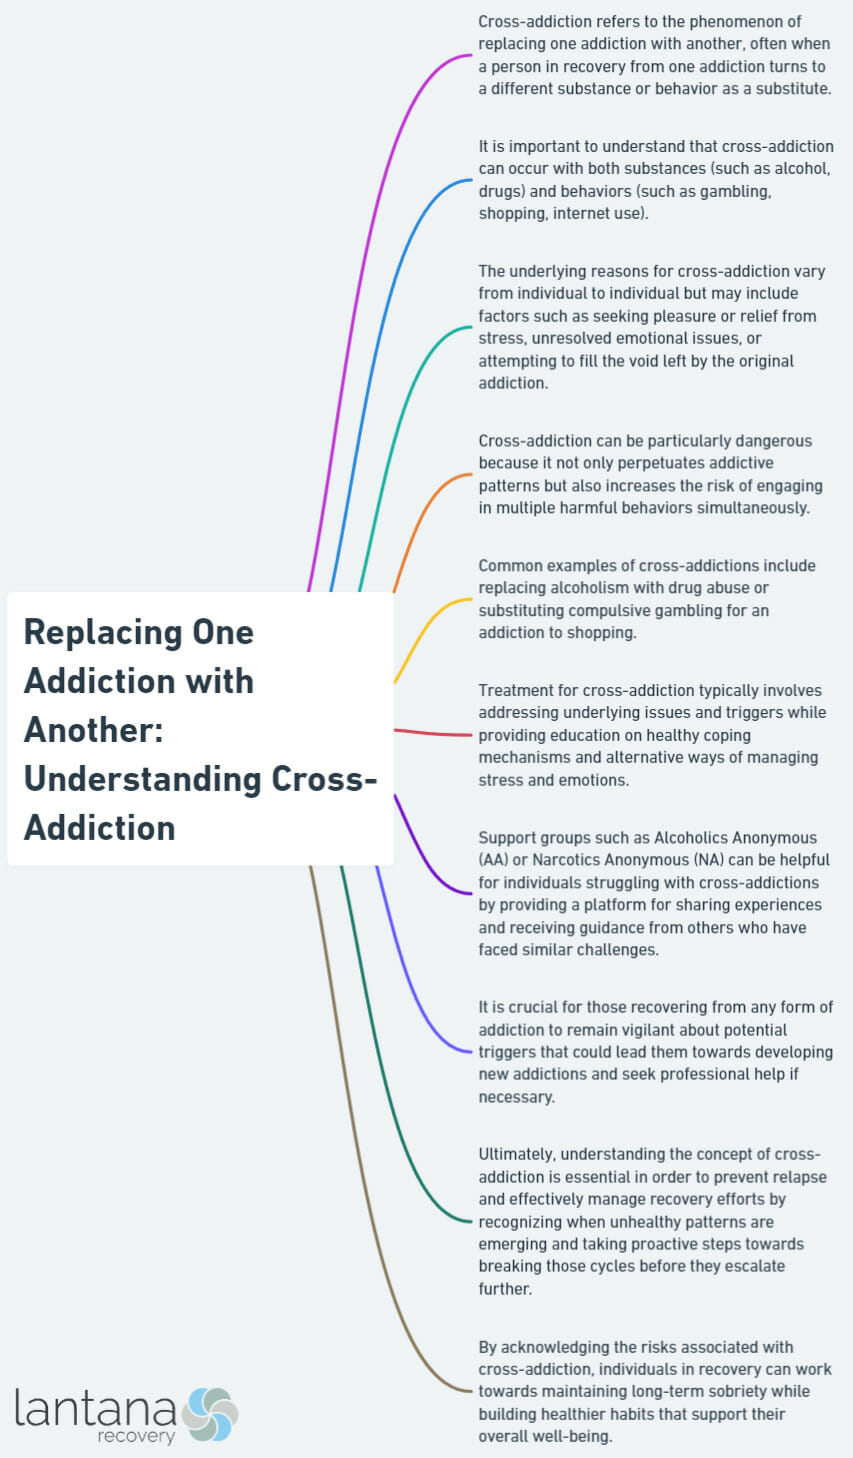 Replacing One Addiction with Another: Understanding Cross-Addiction